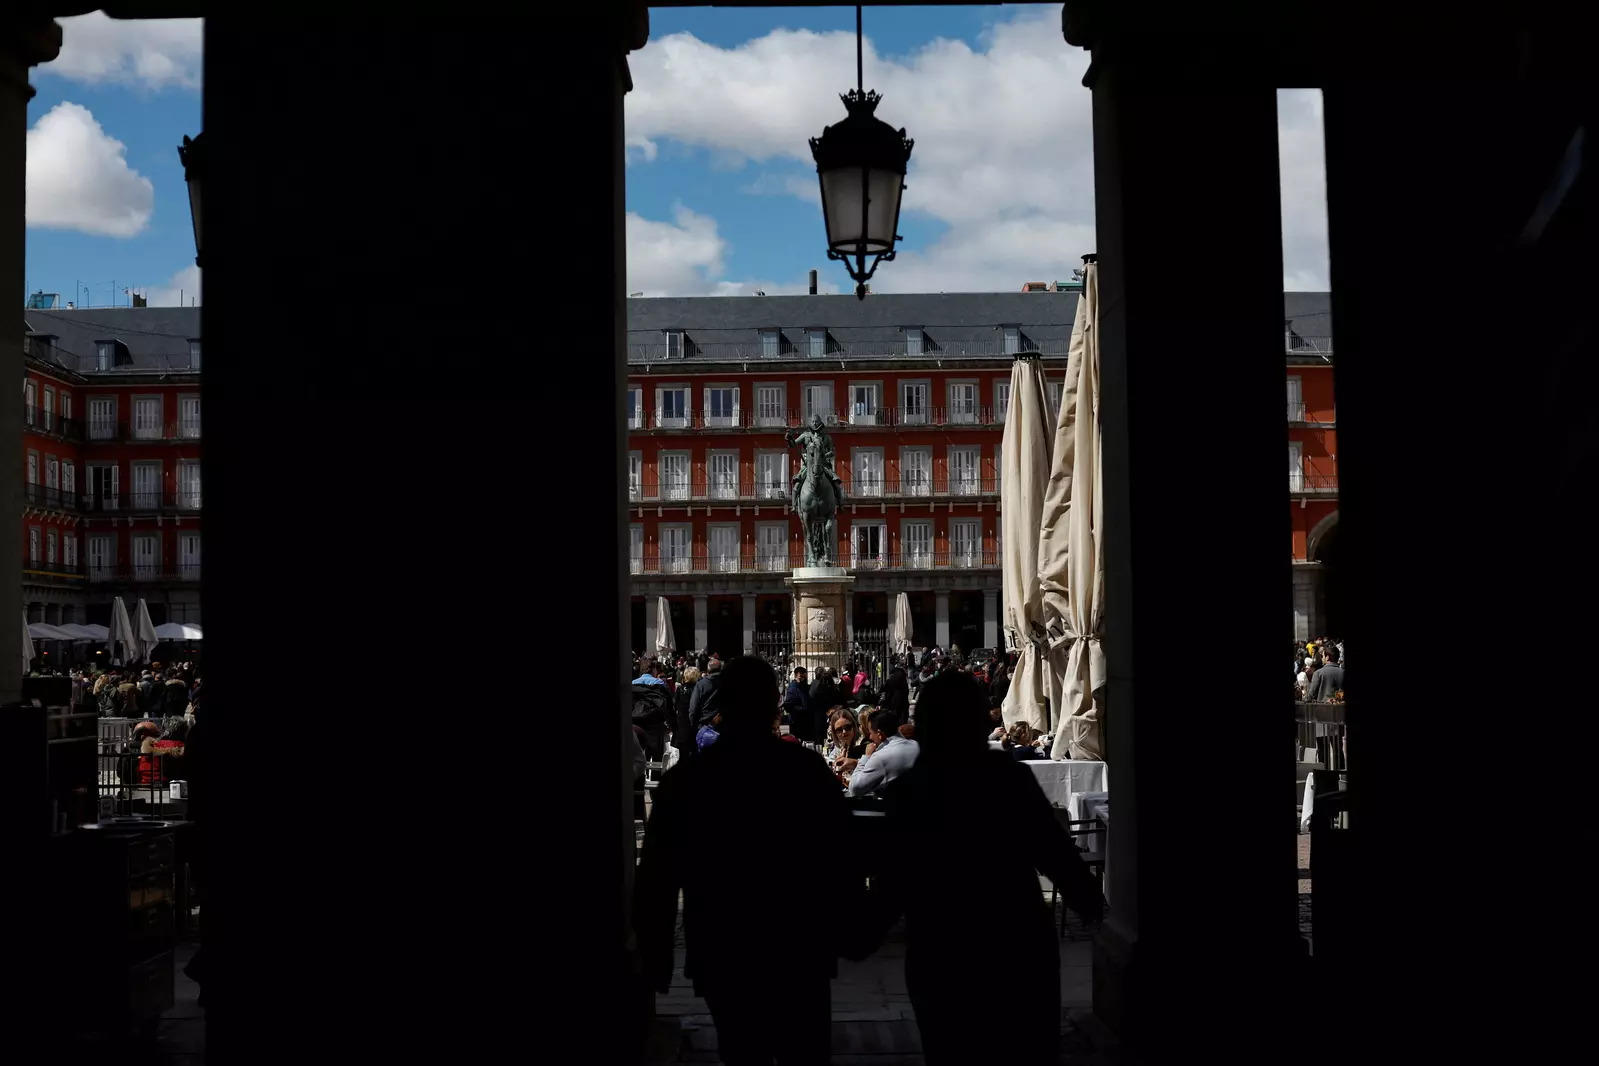   Tourists hang out at Plaza Mayor square in Madrid, Spain, April 3, 2022. Picture taken April 3, 2022. REUTERS/Susana Vera